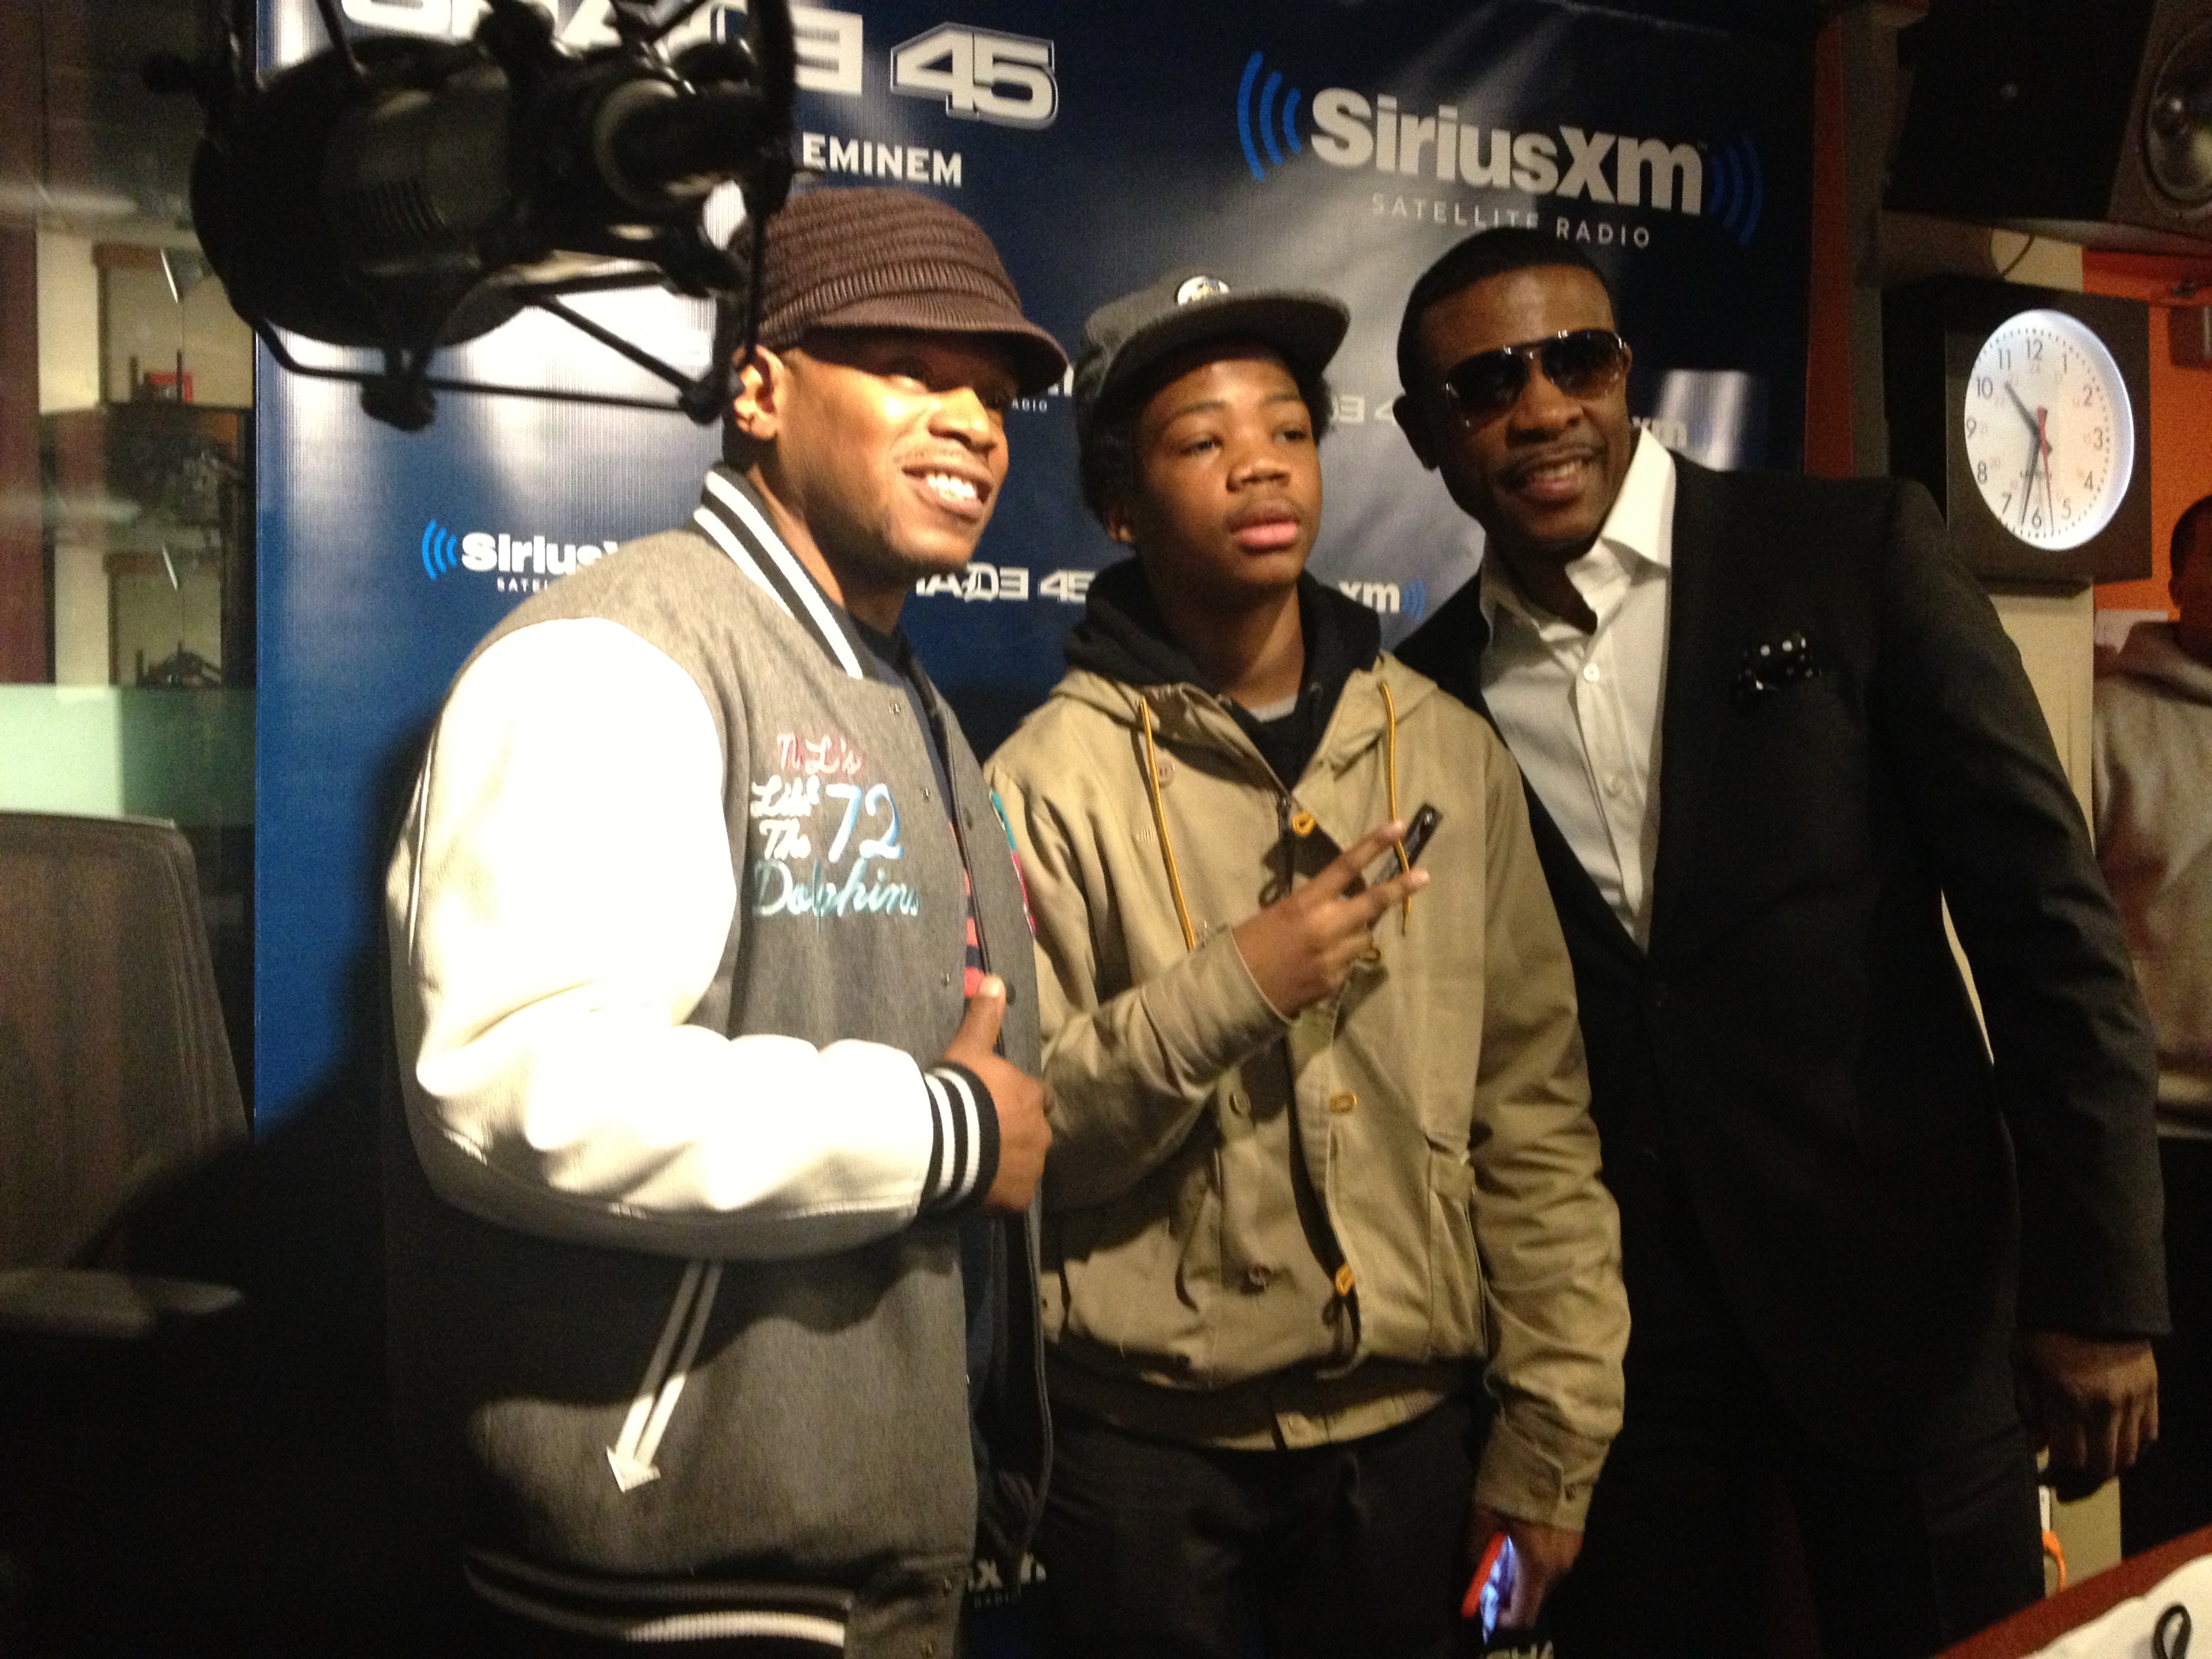 Astro, Sway and Keith Sweat @ Sway in the Morning on Shady 45. 2-20-13